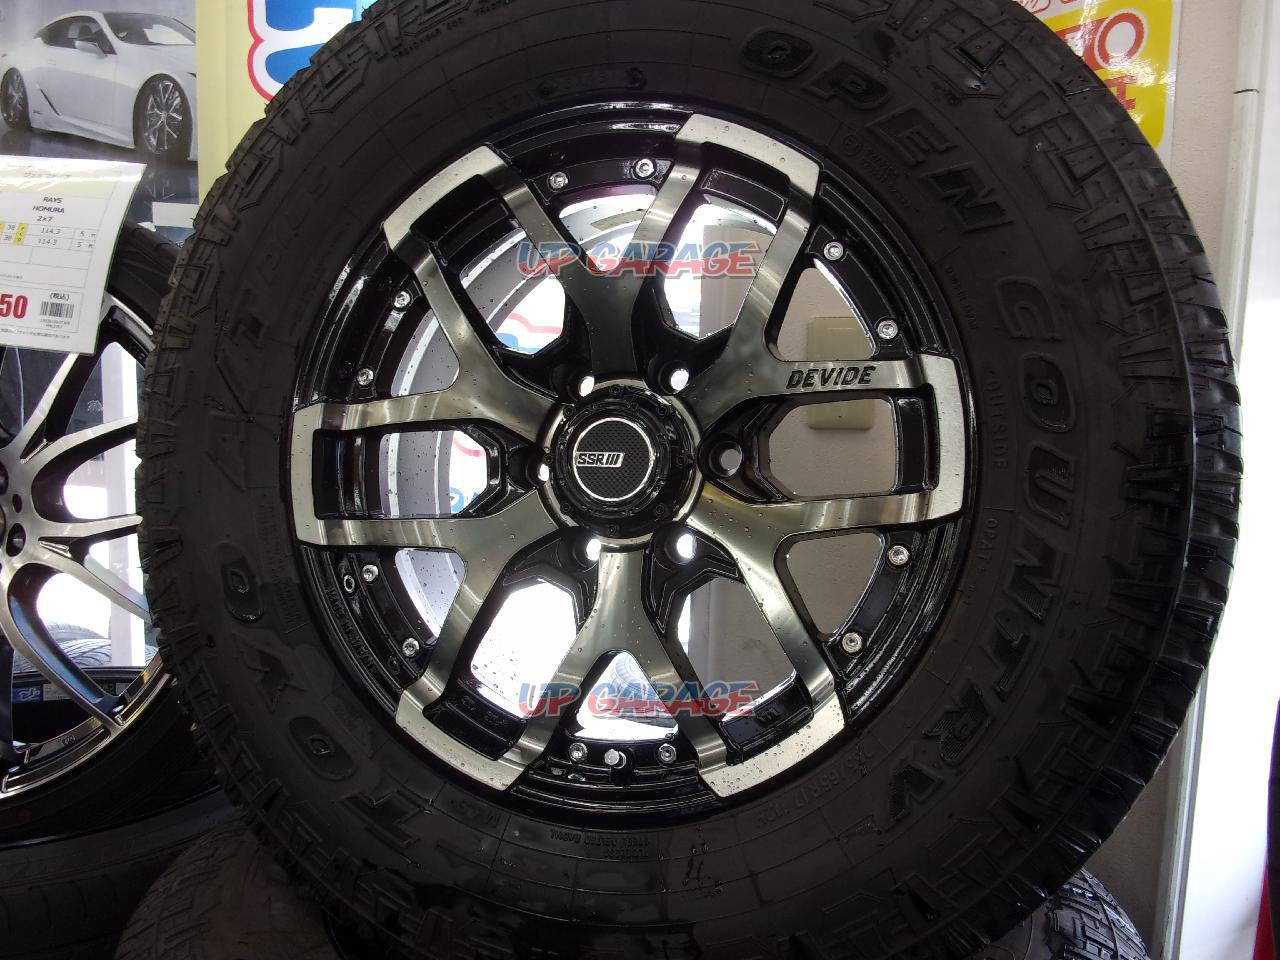 Tanabe Ssr Series Devide Zs Toyo Open Country A T Plus 8 0jx17 139 7 6h For Sale Croooober